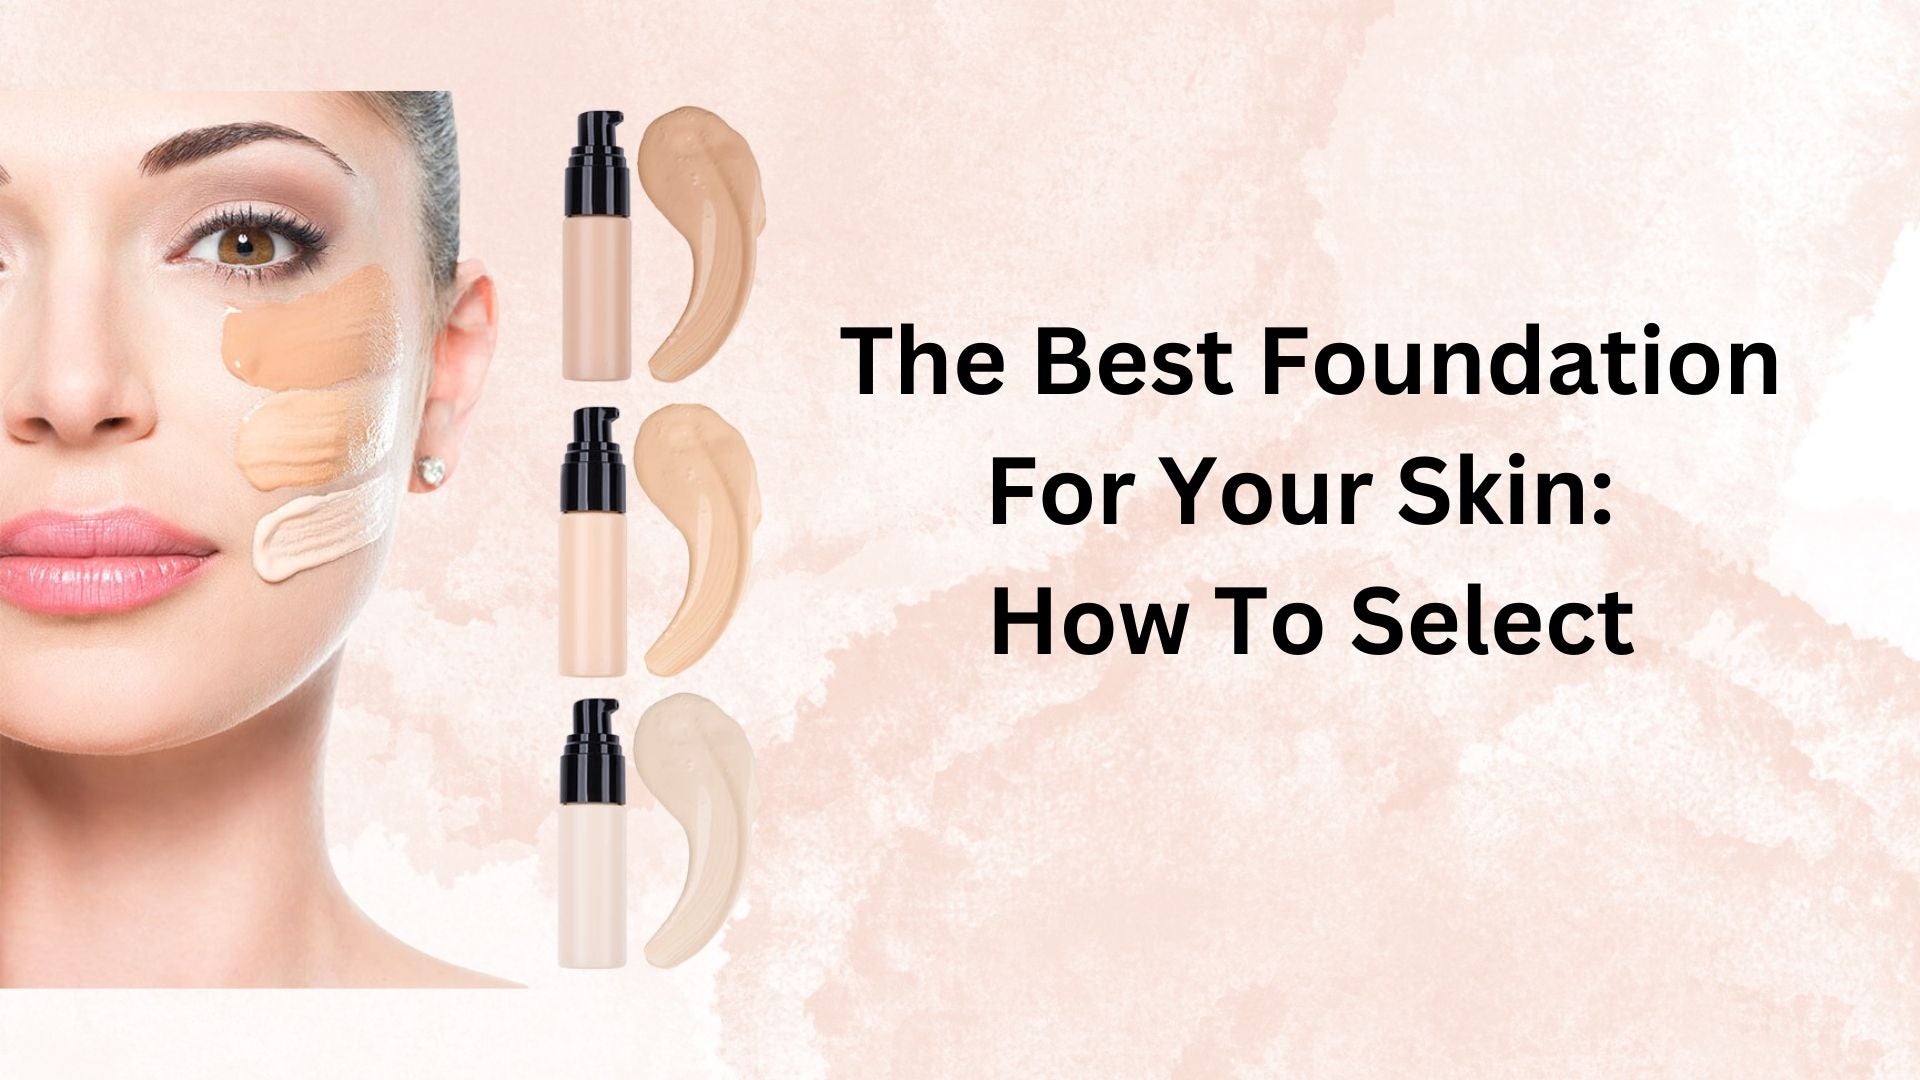 The Best Foundation For Your Skin: How To Select